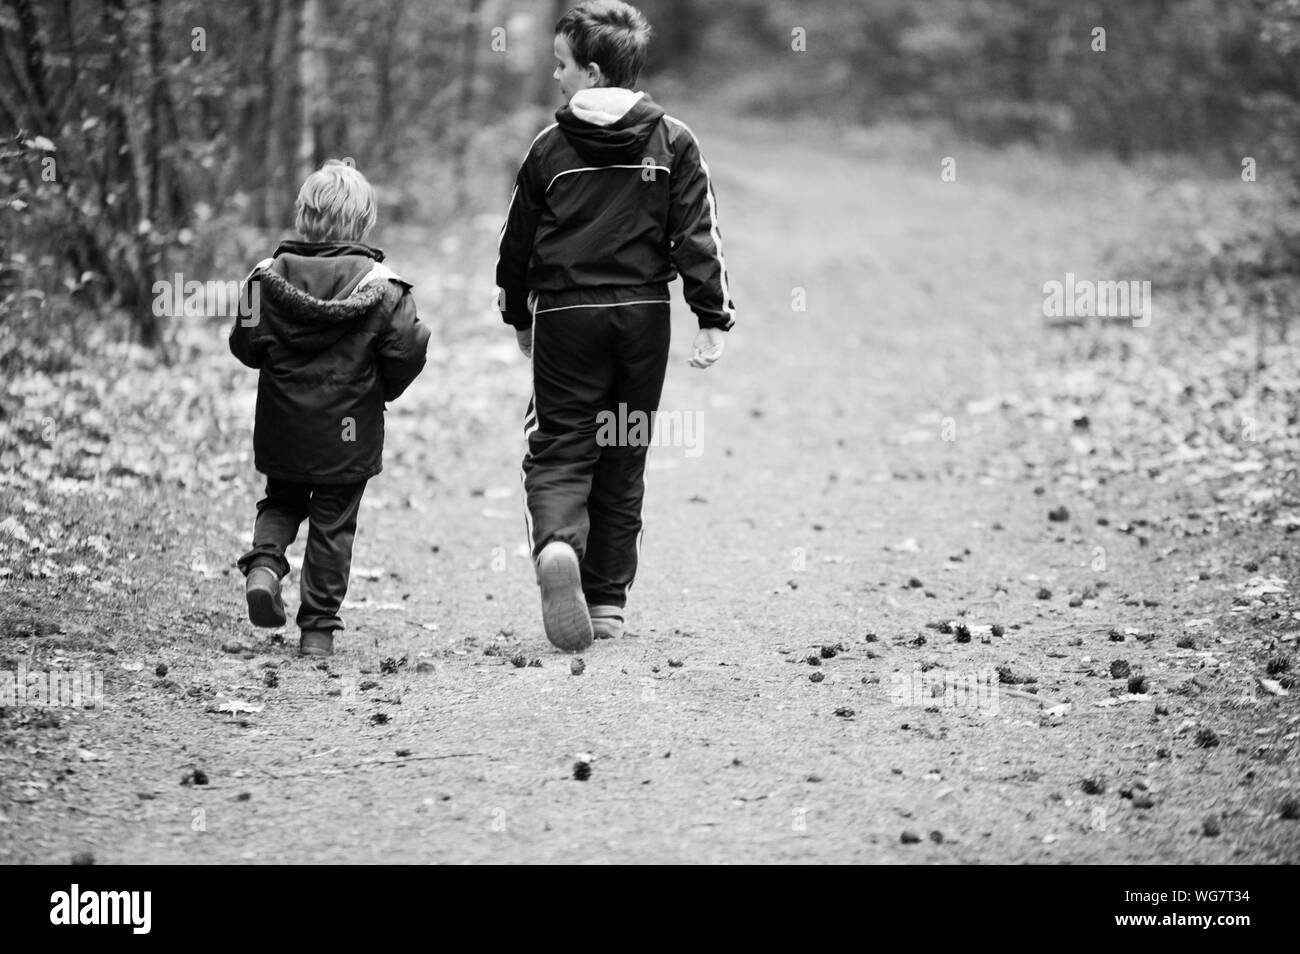 Two boys in forest Black and White Stock Photos & Images - Alamy